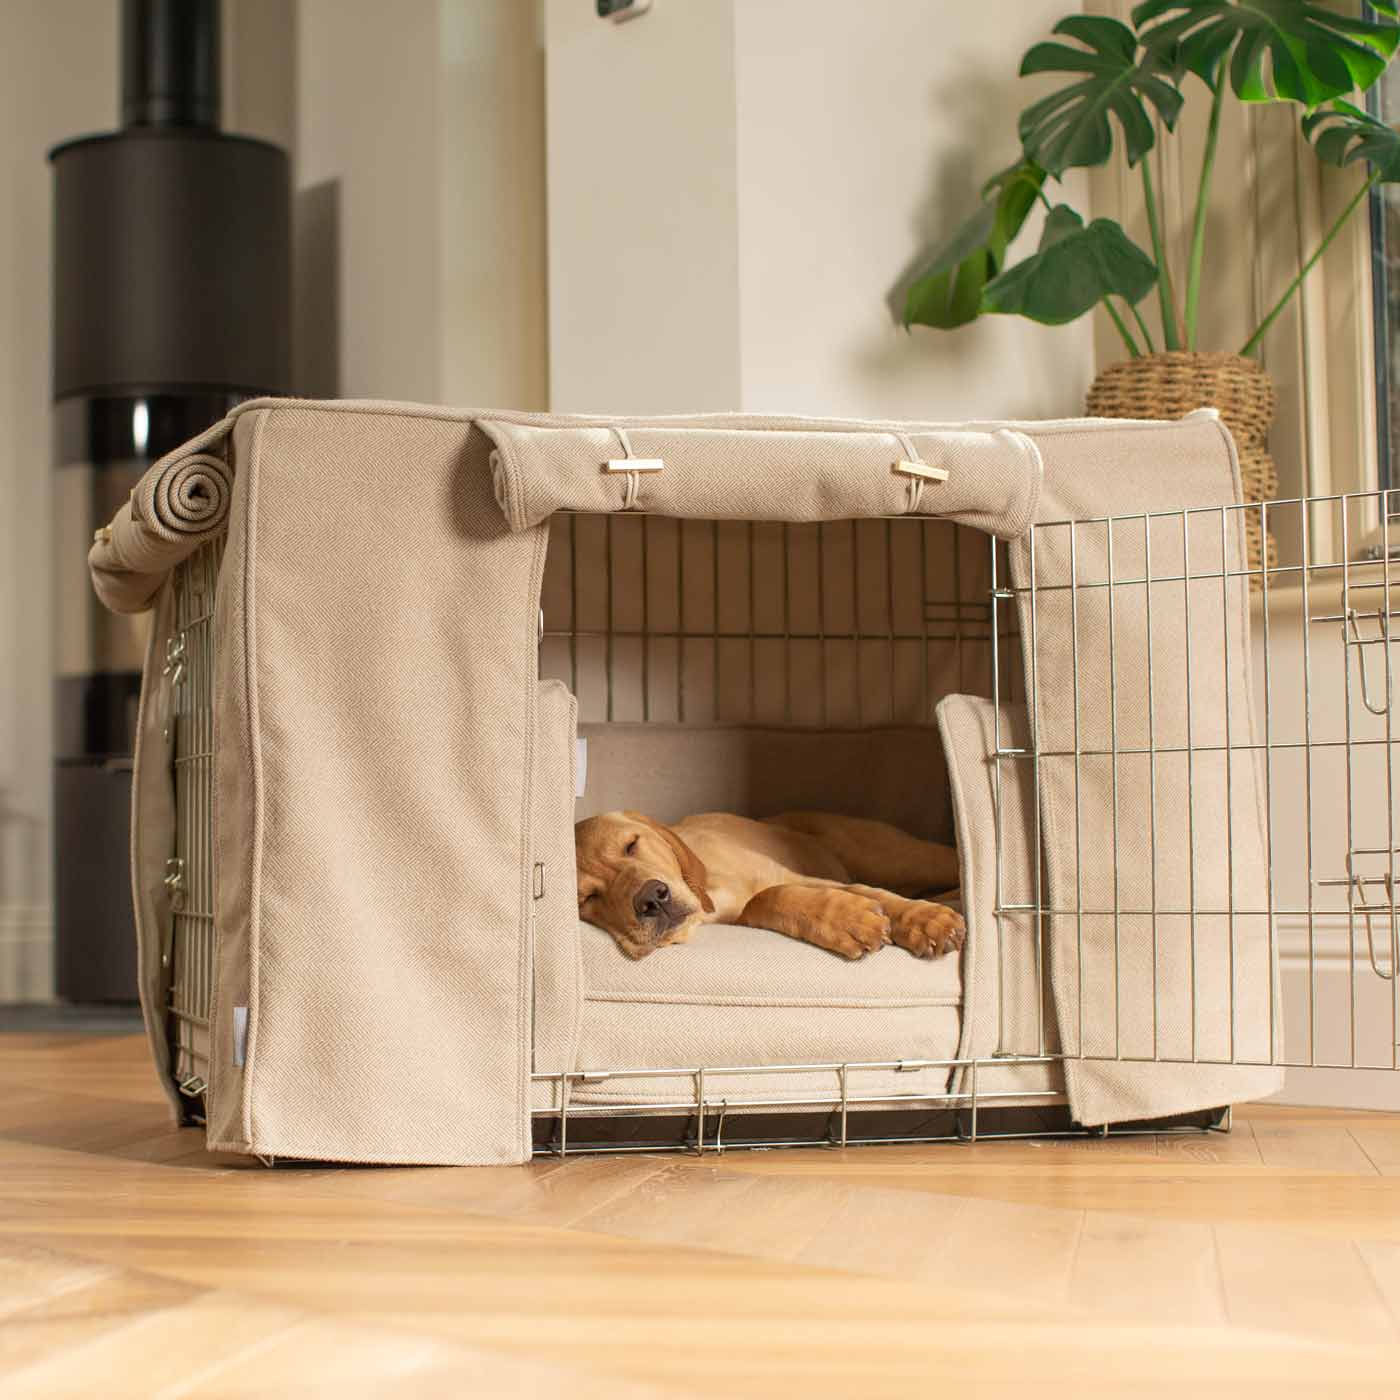 Luxury Heavy Duty Dog Cage, In Stunning Natural Herringbone Tweed Cage Set, The Perfect Dog Cage Set For Building The Ultimate Pet Den! Dog Cage Cover Available To Personalize at Lords & Labradors US